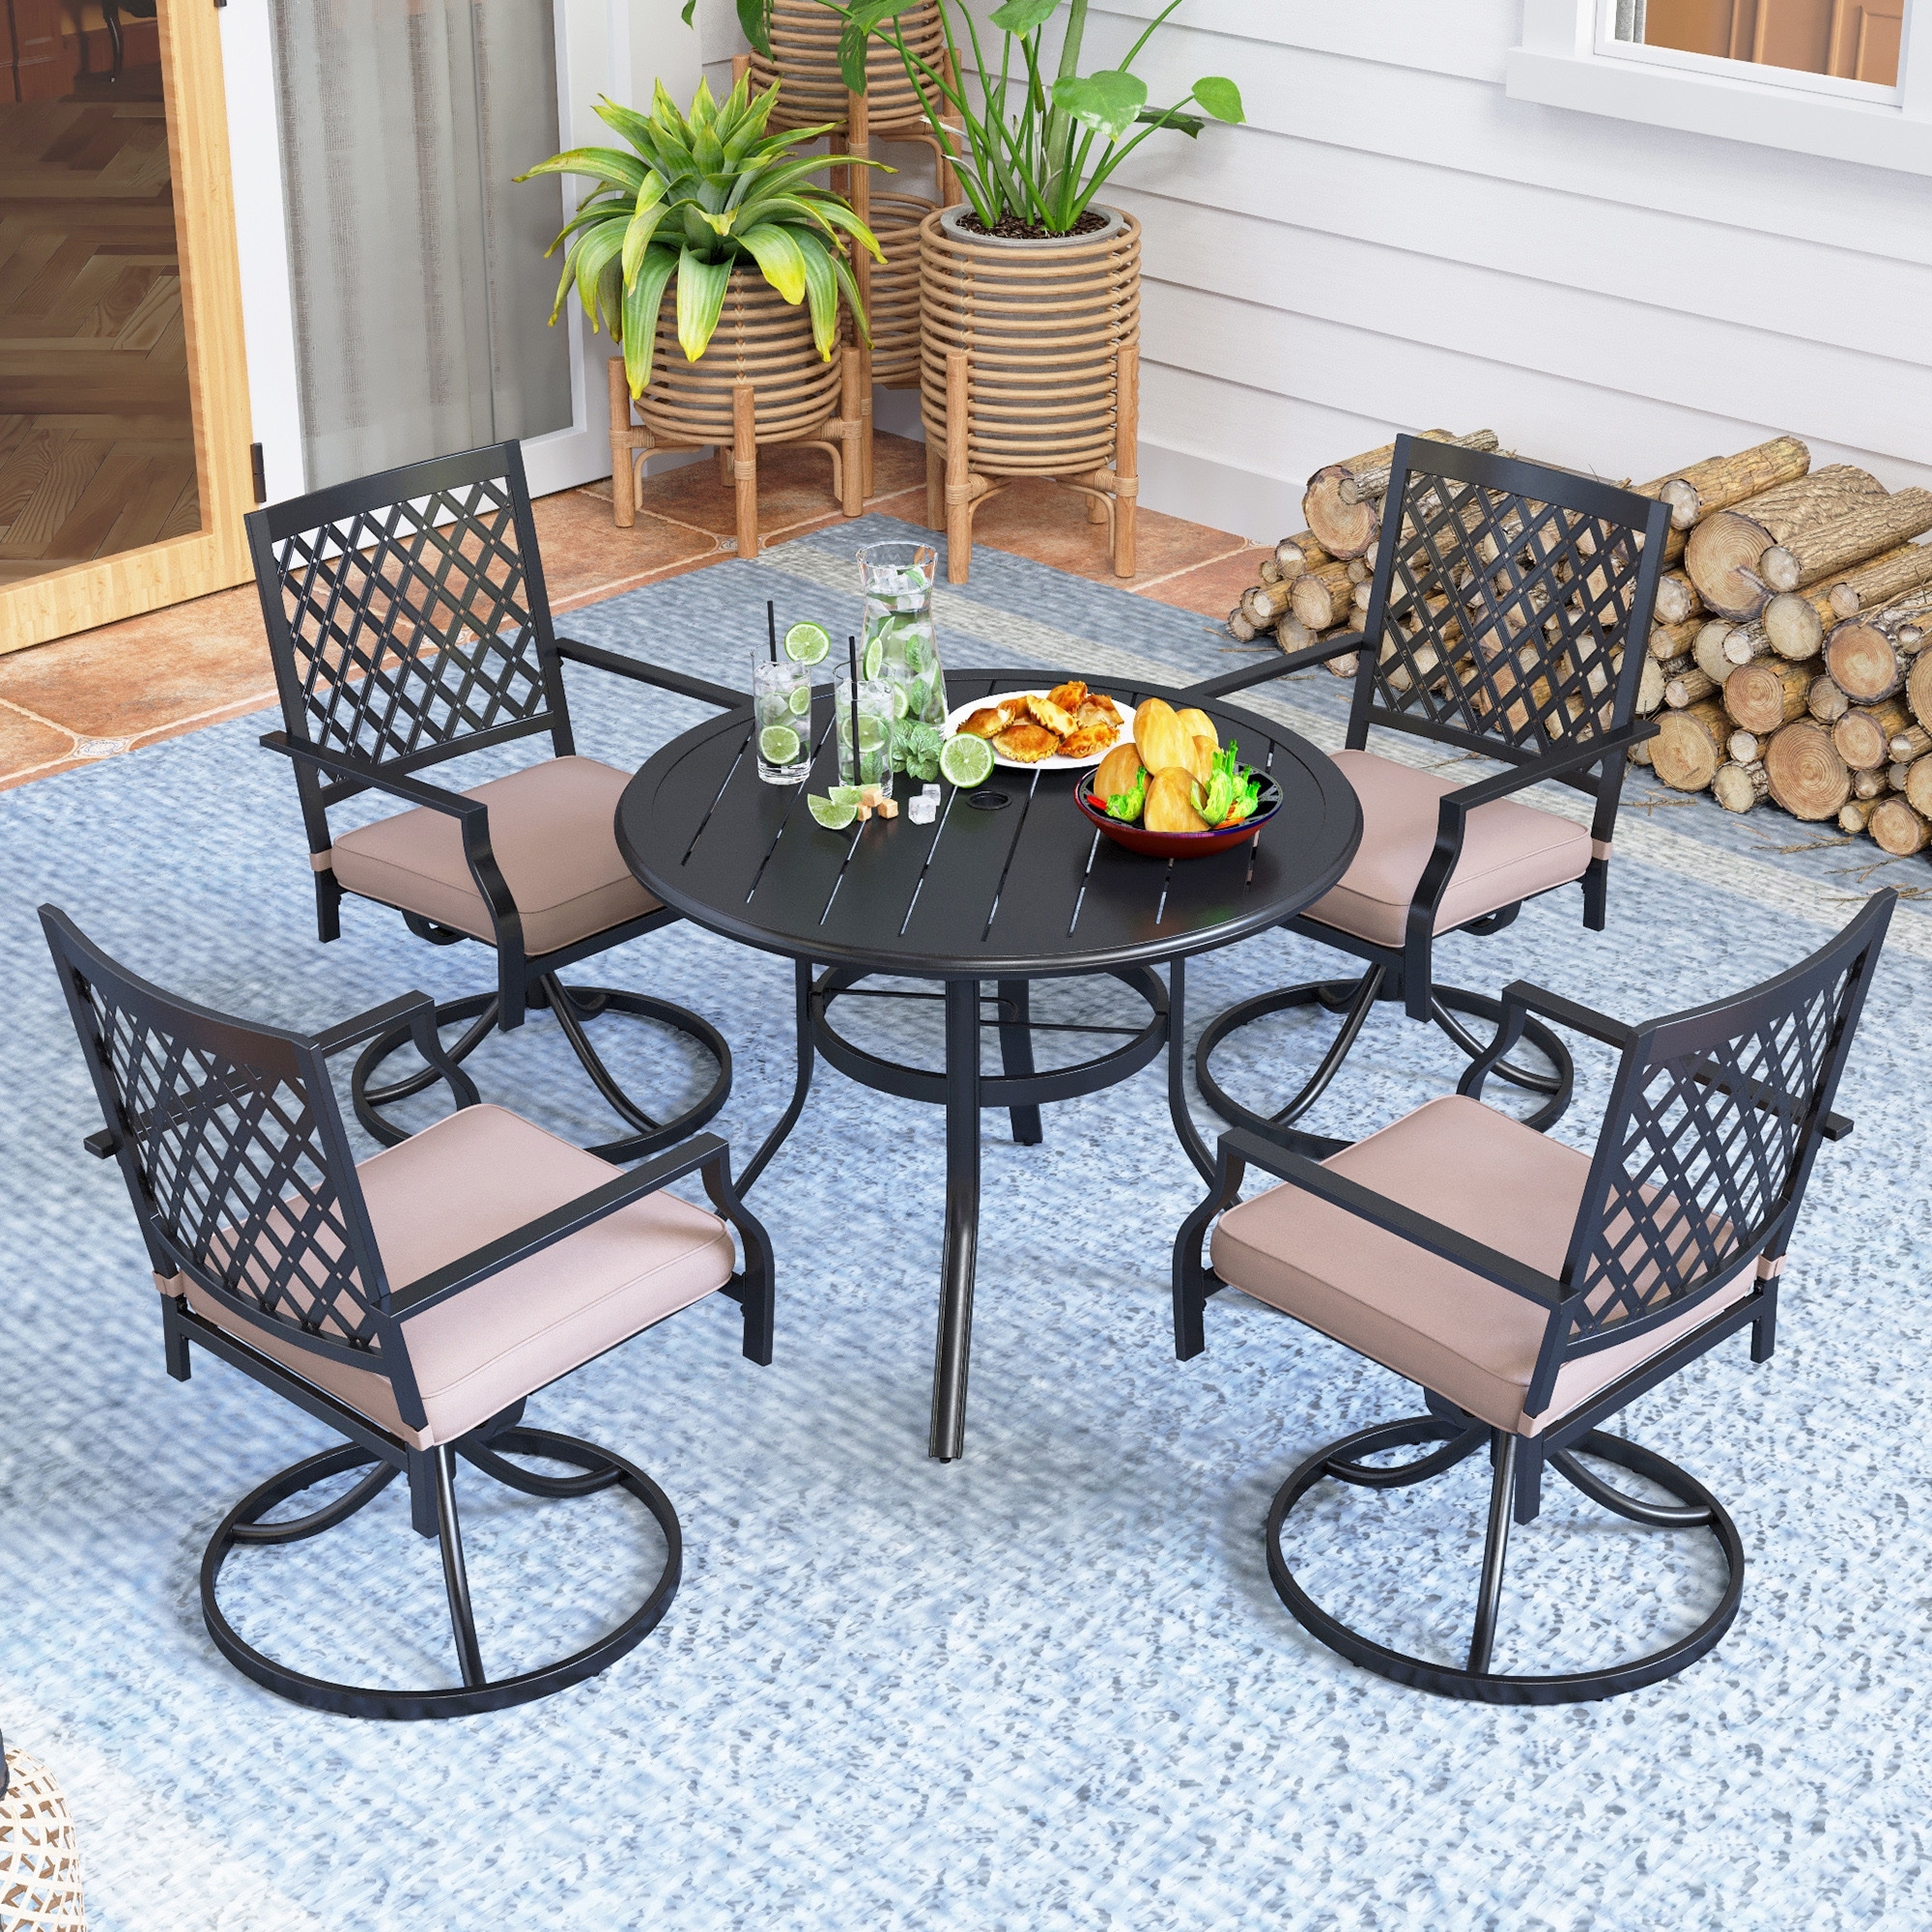 https://ak1.ostkcdn.com/images/products/is/images/direct/35567b442533226caa4bad26503280a654f844d2/MFSTUDIO-5-Piece-Outdoor-Patio-Dining-Set%2C-4-Swivel-Armrest-Chairs-with-Cushions-and-37.8%22-Round-Table-with-1.57%22-Umbrella-Hole.jpg